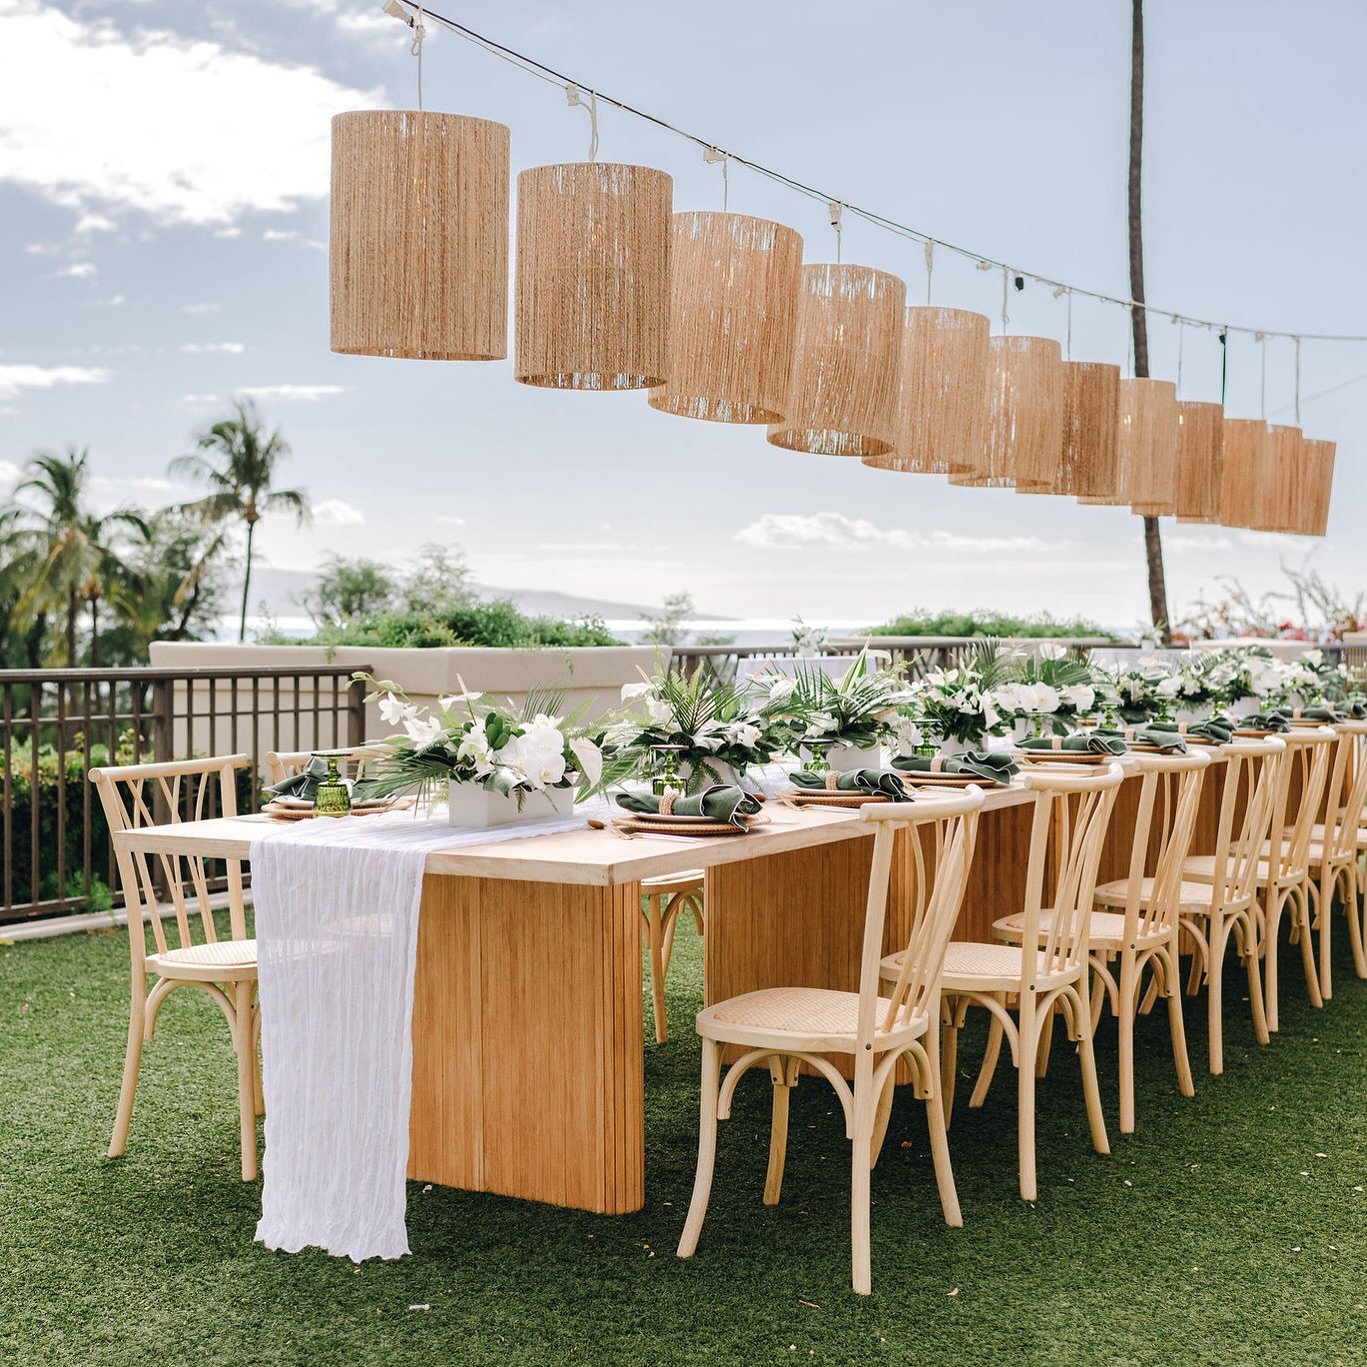 The final look and details we always love to see to ensure your special day is everything you&rsquo;ve ever dreamed of, and more!

Event Design &amp; Coordination @whiteorchidwedding 
Venue @gathermauiweddingsevents 
Photography @marylanestudios 
Flo